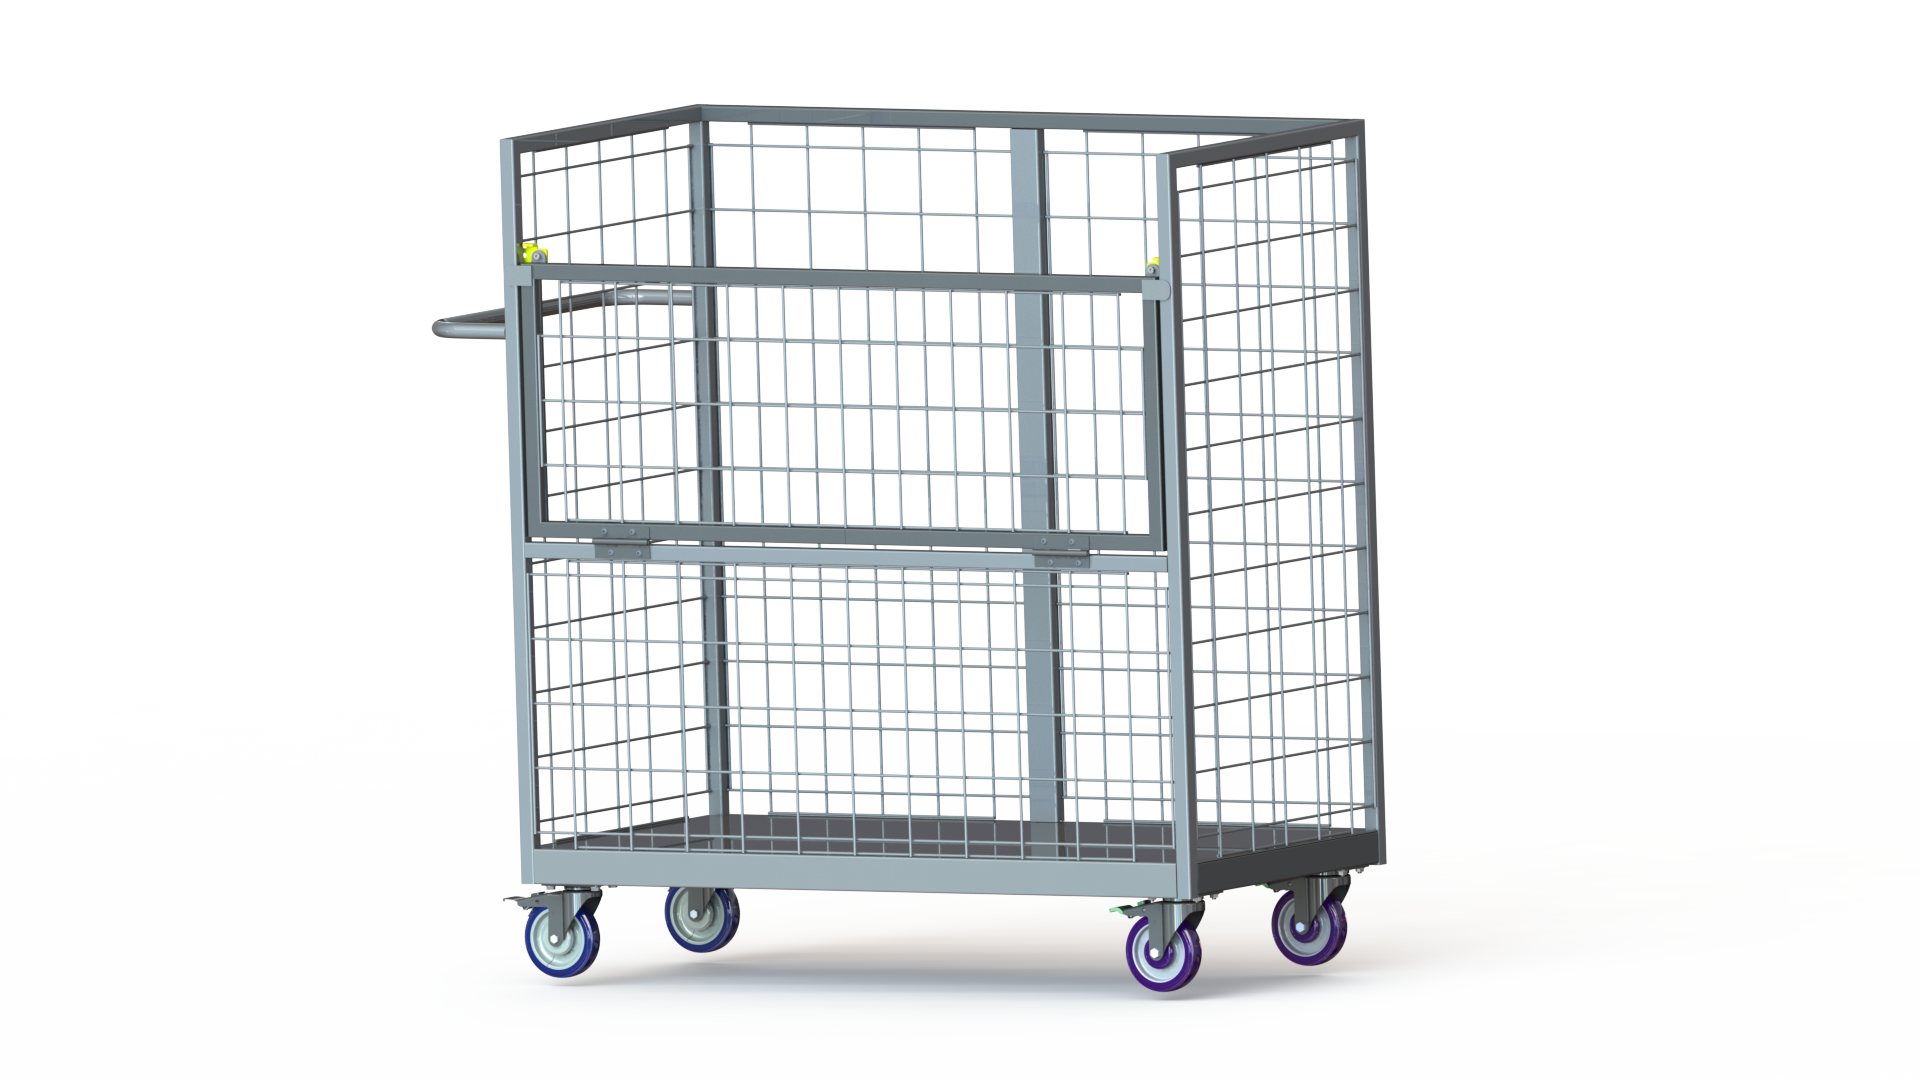 Drop Gate Cart Lock. Drop gate is held by two swivel locks to keep items in cart. Material handling INDUSTRIAL CARTS, picking cart, forklift compatible cart Forklift Cart picking cart | National Cart picking Utility Cart, Distribution Cart, picking cart, ecom cart, ecommerce cart, ecommerce picking cart, picking cart, grocery cart, grocery picking cart, department store cart, beverage cart BACK STOCK CARTS Picking Cart